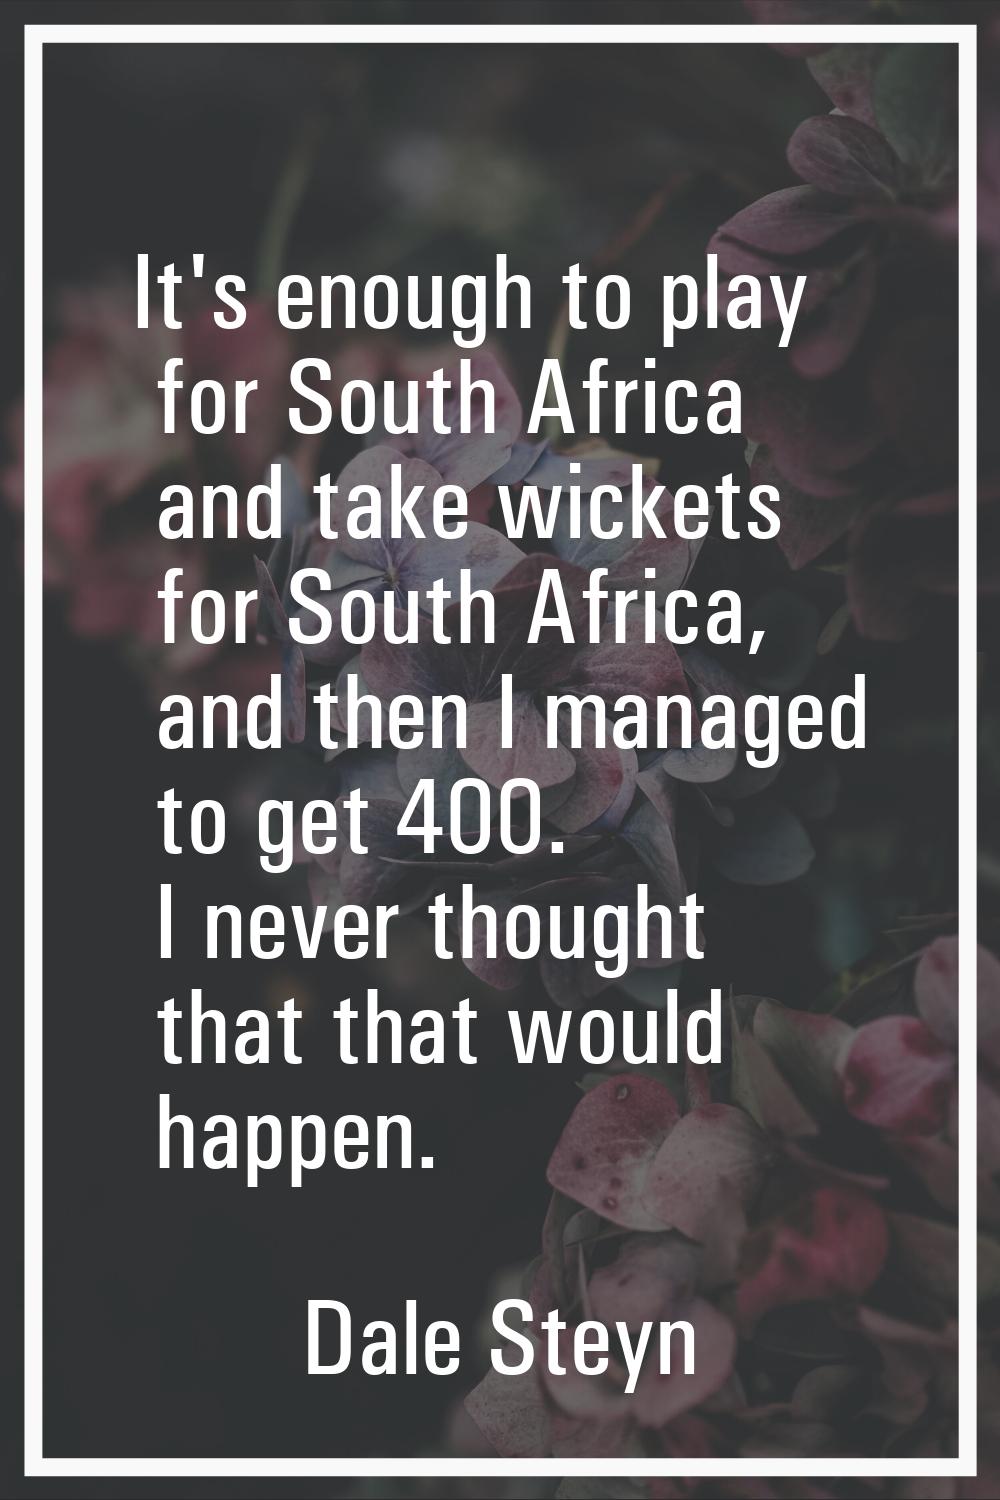 It's enough to play for South Africa and take wickets for South Africa, and then I managed to get 4